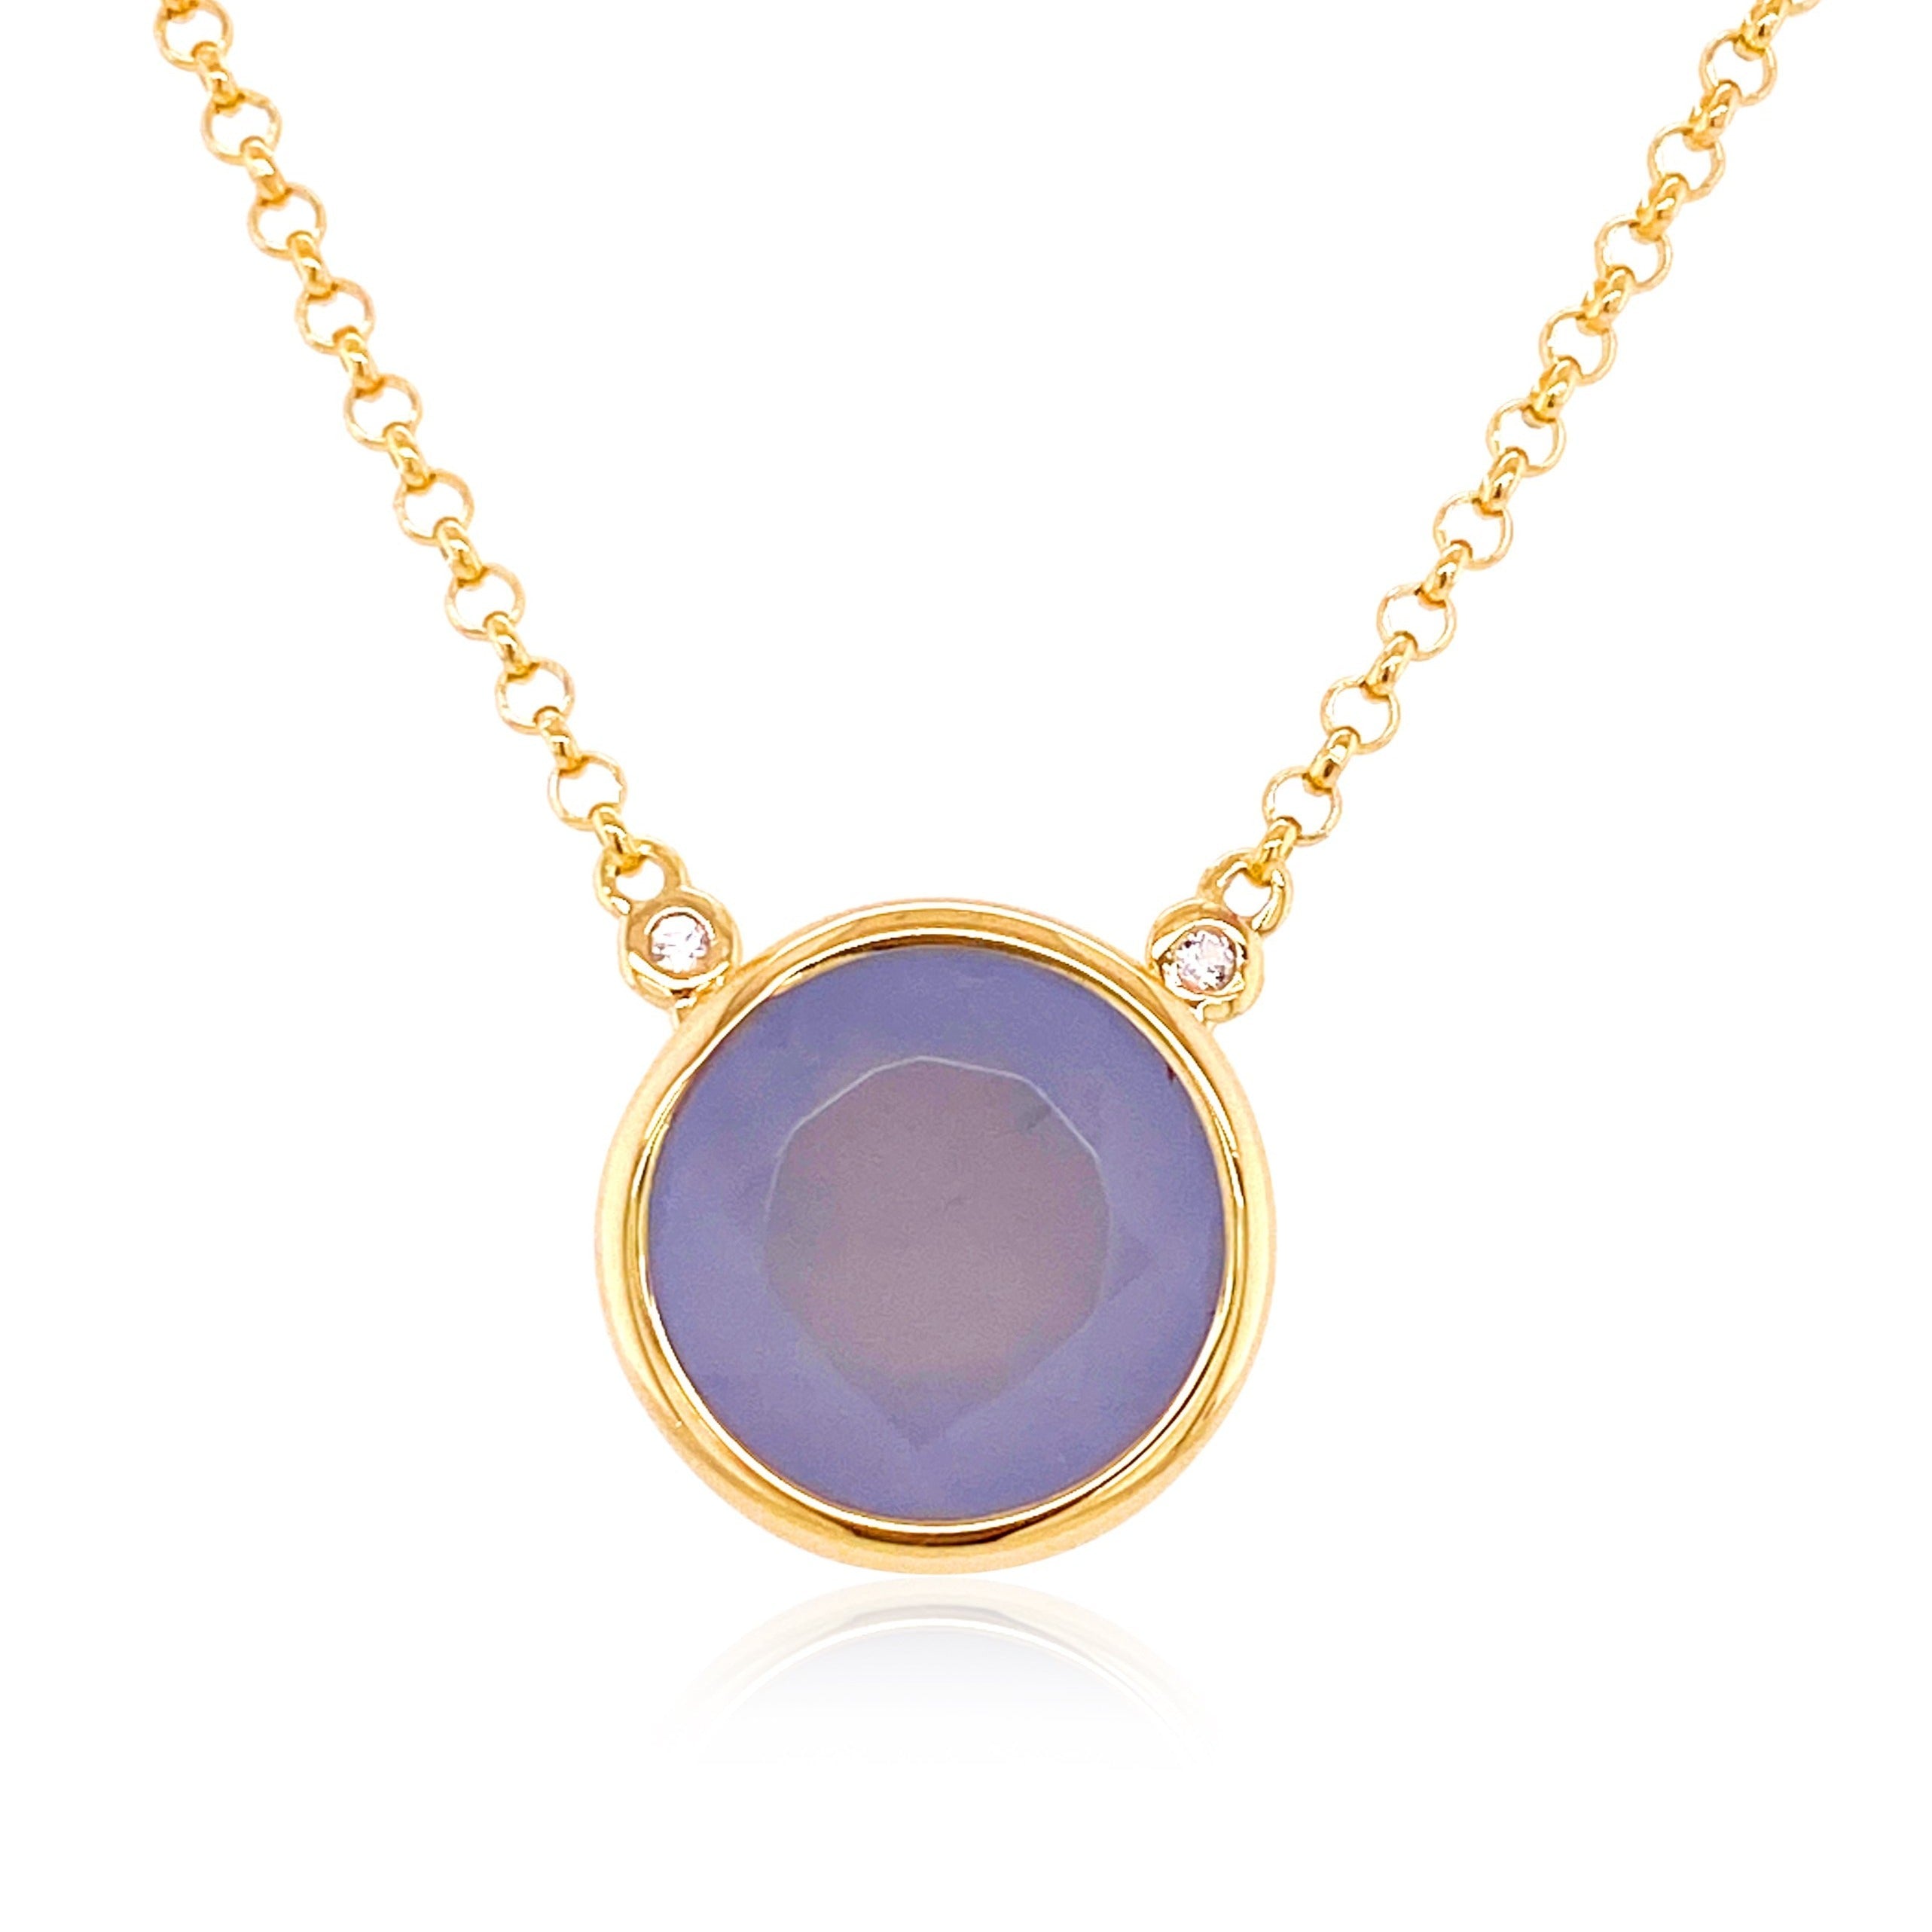 SIGNATURE Necklace (1287) - Blue Chalcedony / YG